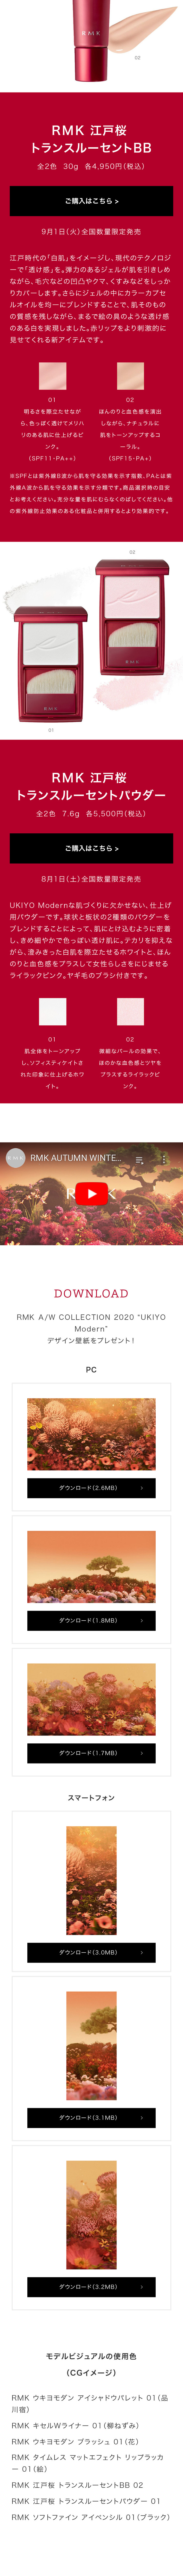 RMK AUTUMN WINTER COLLECTION 2020_sp_2